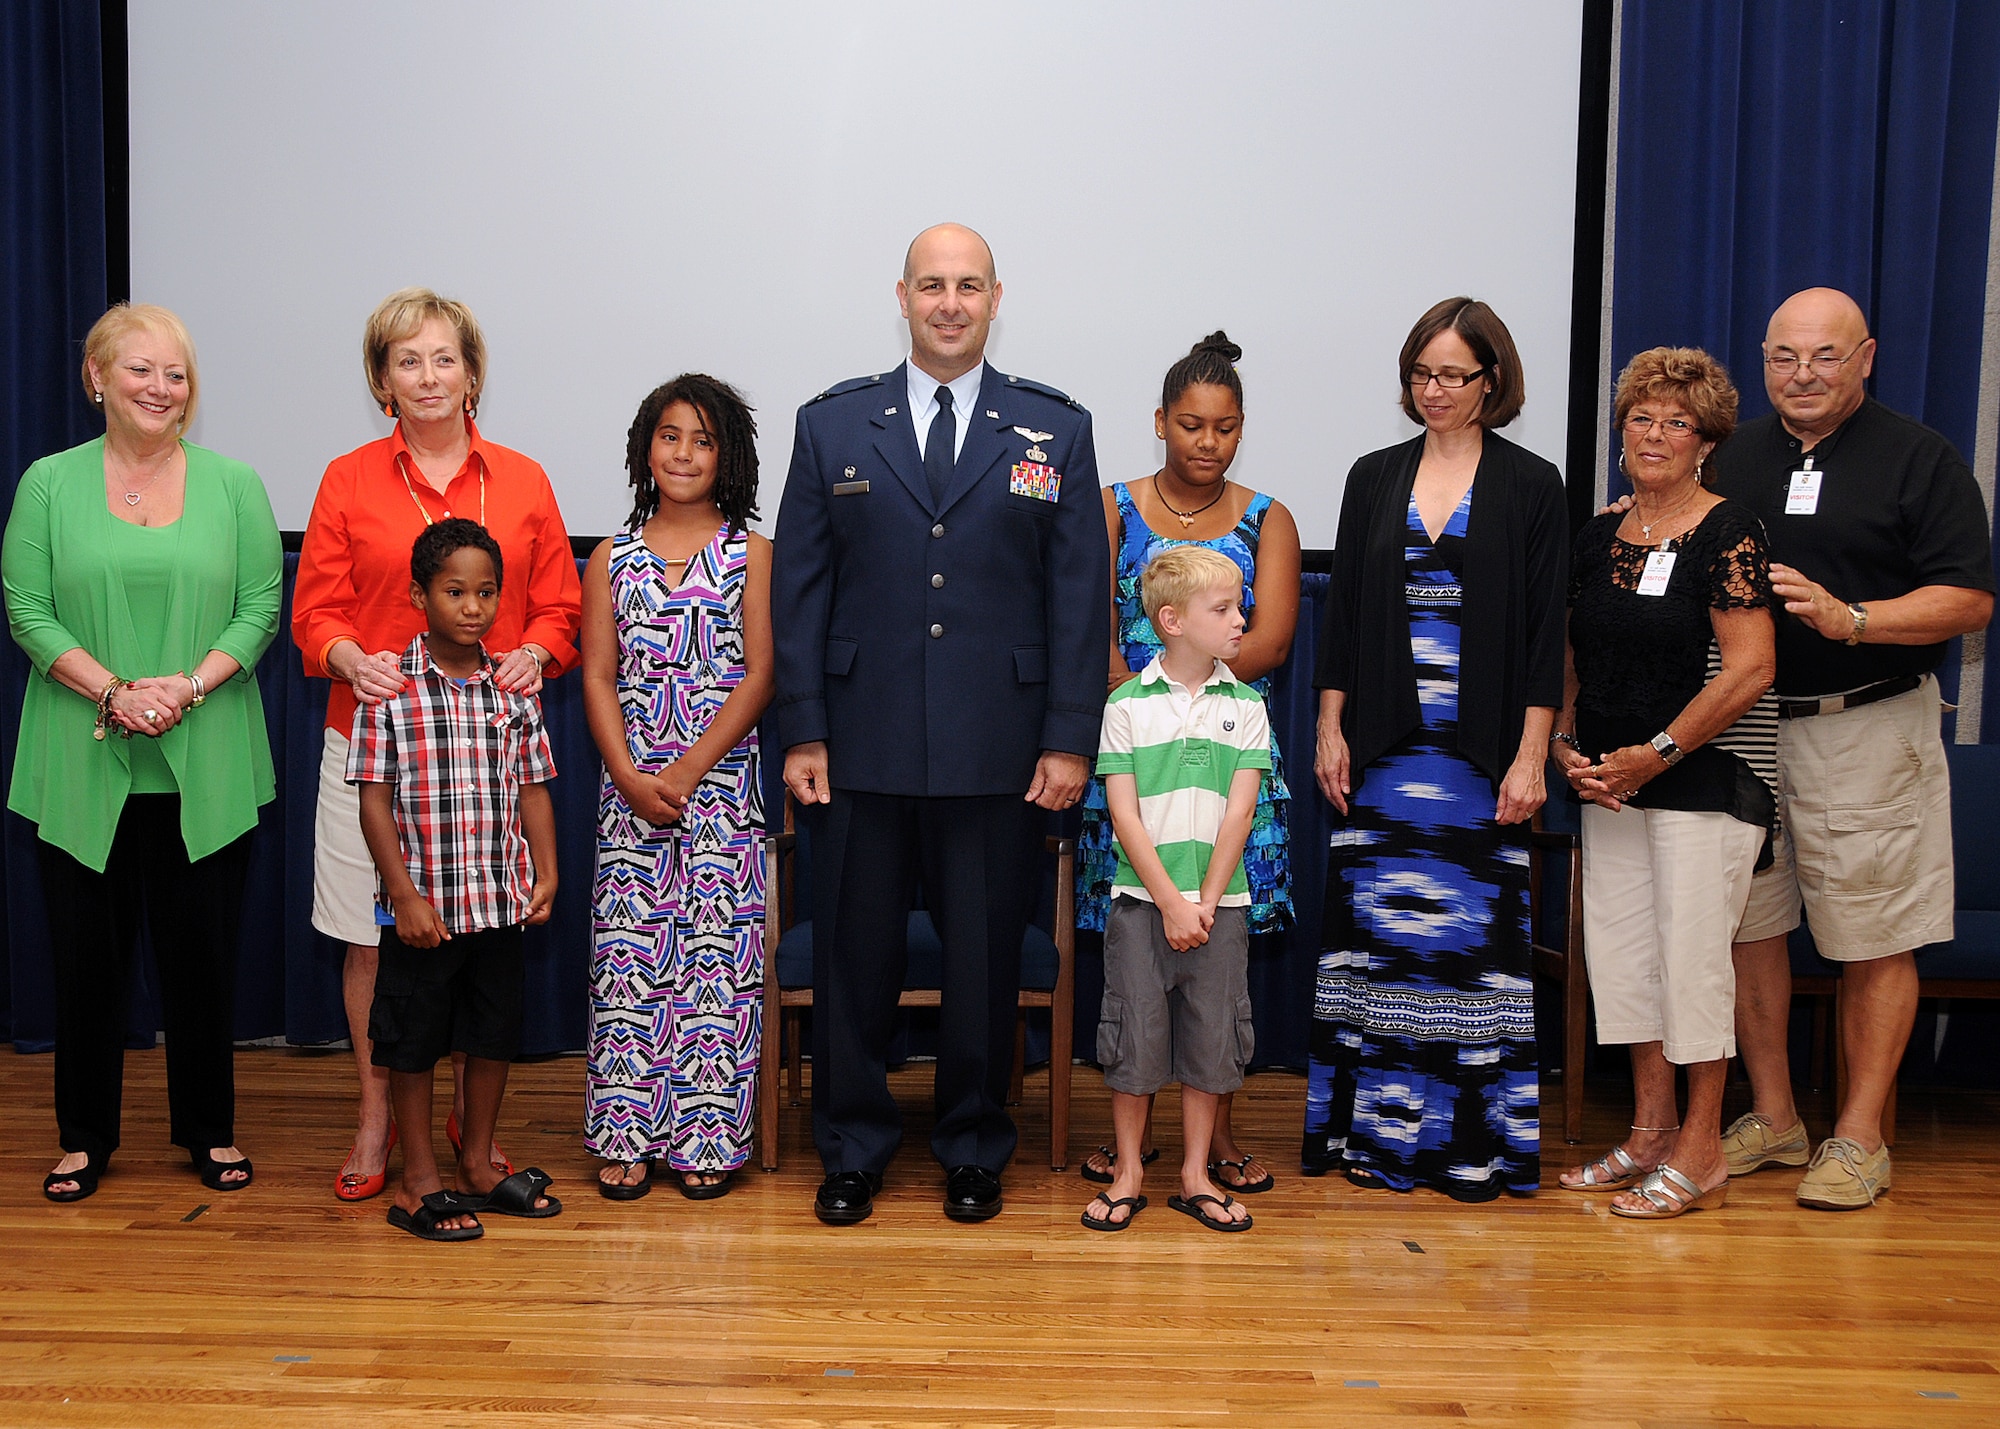 Colonel Anthony Hamel, Commander, 143d Mission Support Group, and his family pose for a photo following his pinning to Colonel. National Guard photo by Master Sgt Janeen Miller